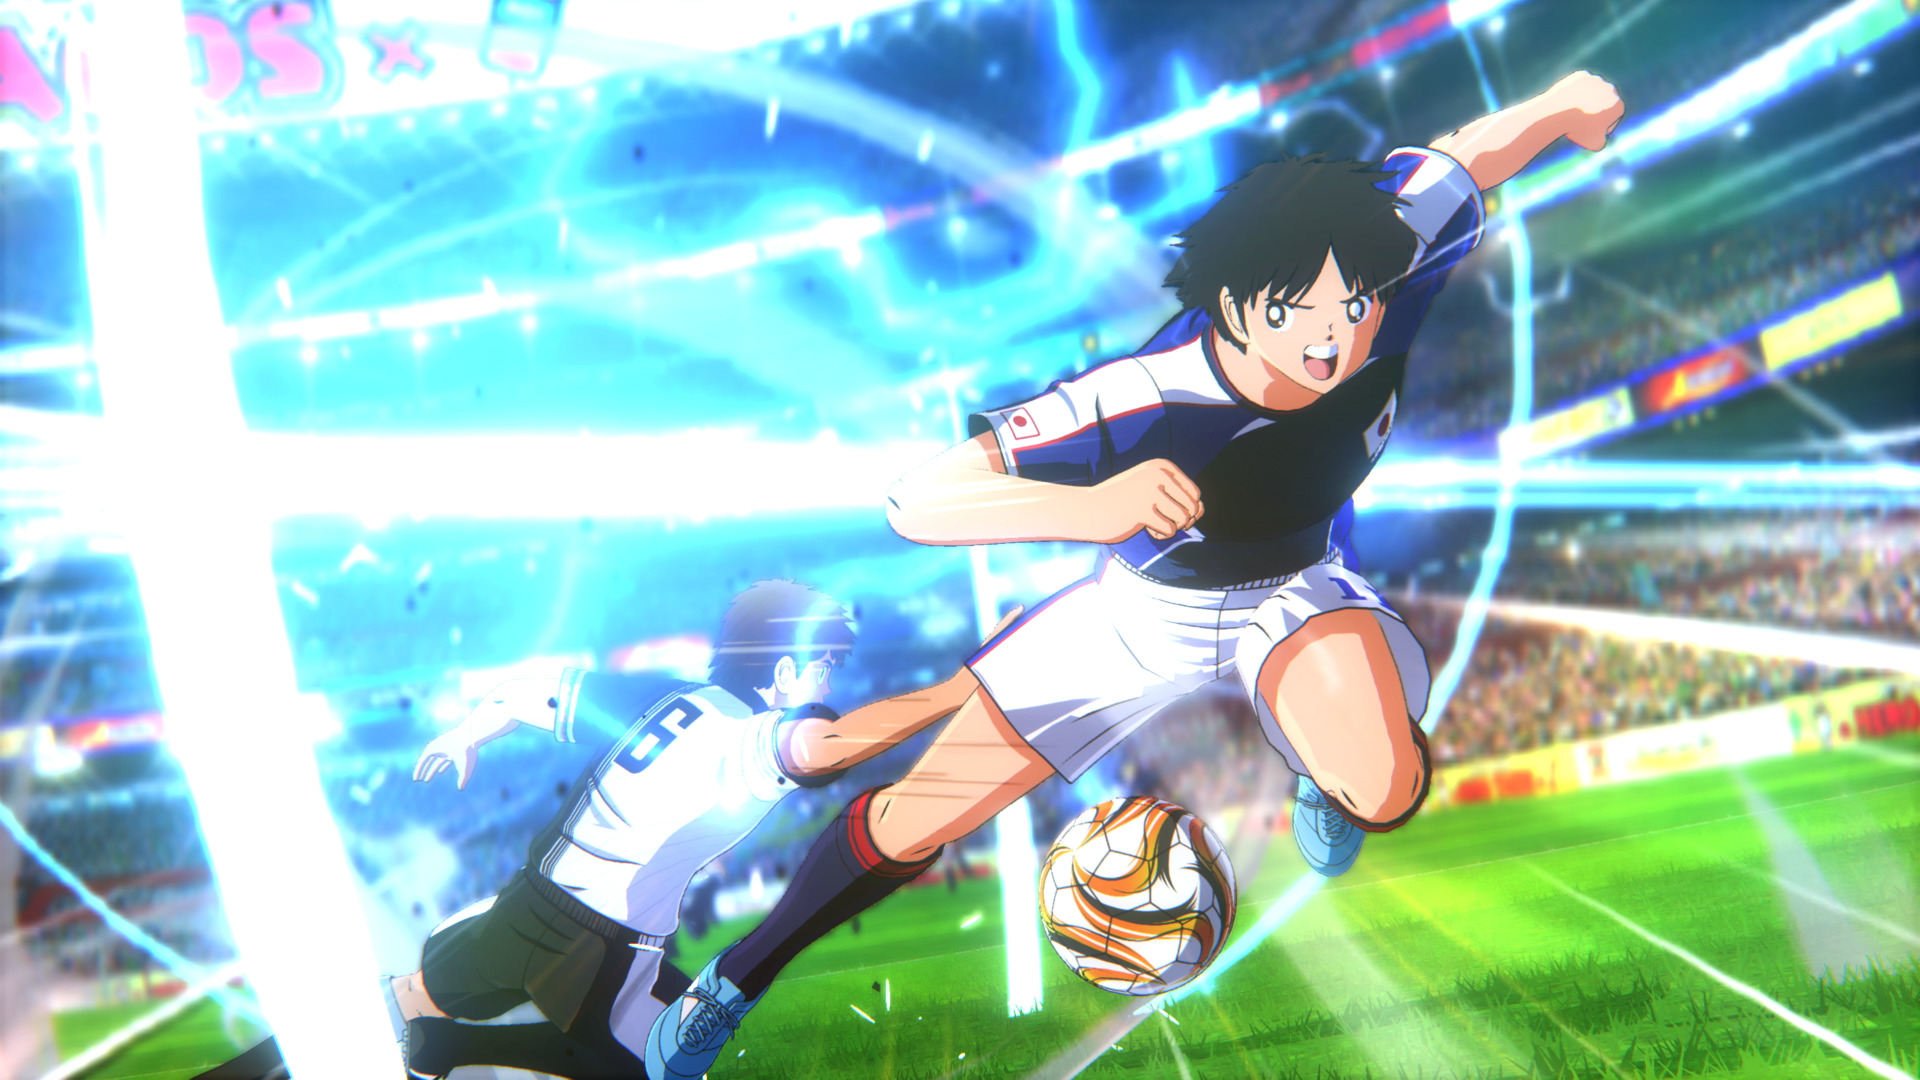 Captain Tsubasa: Rise of New Champions 1.41 update adds Freestyle Matches